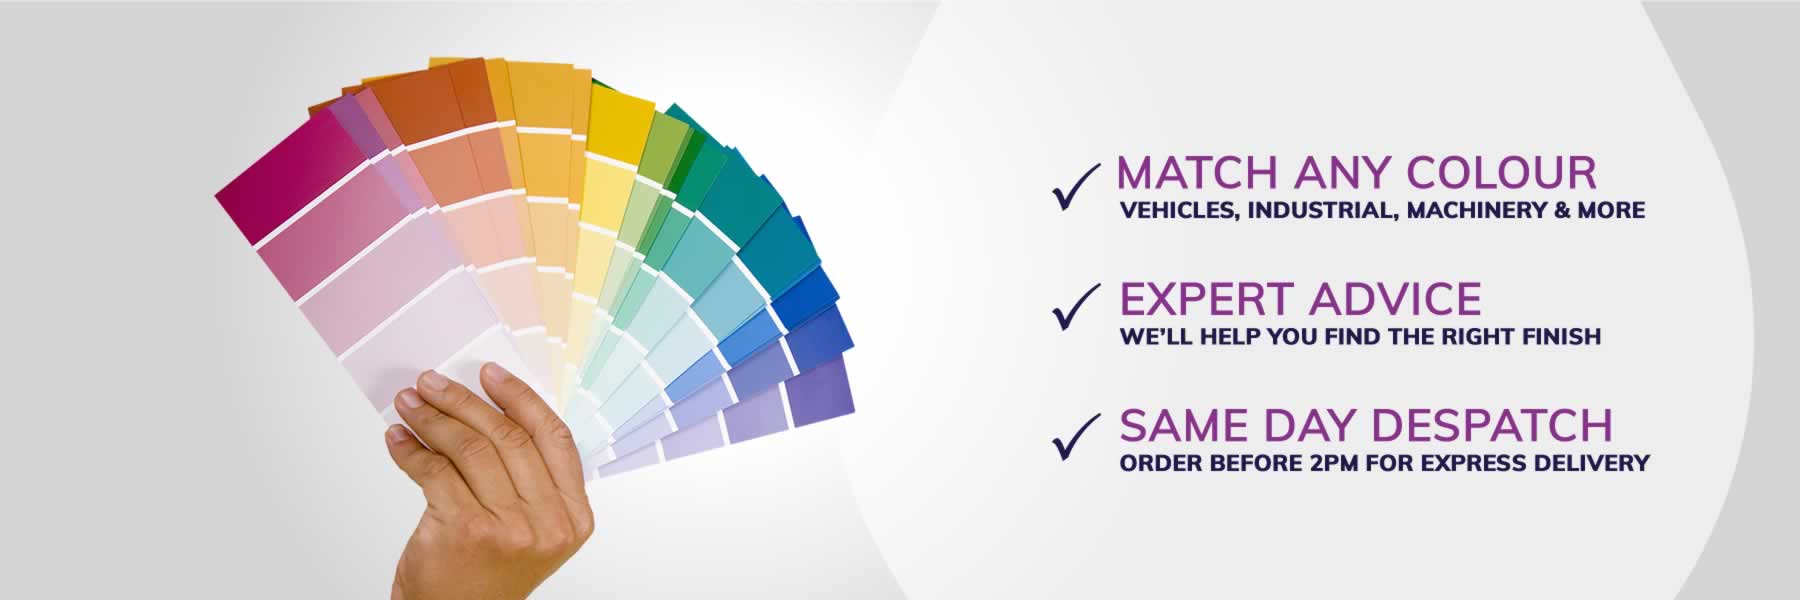 Free Paint Colour Code Matching Service